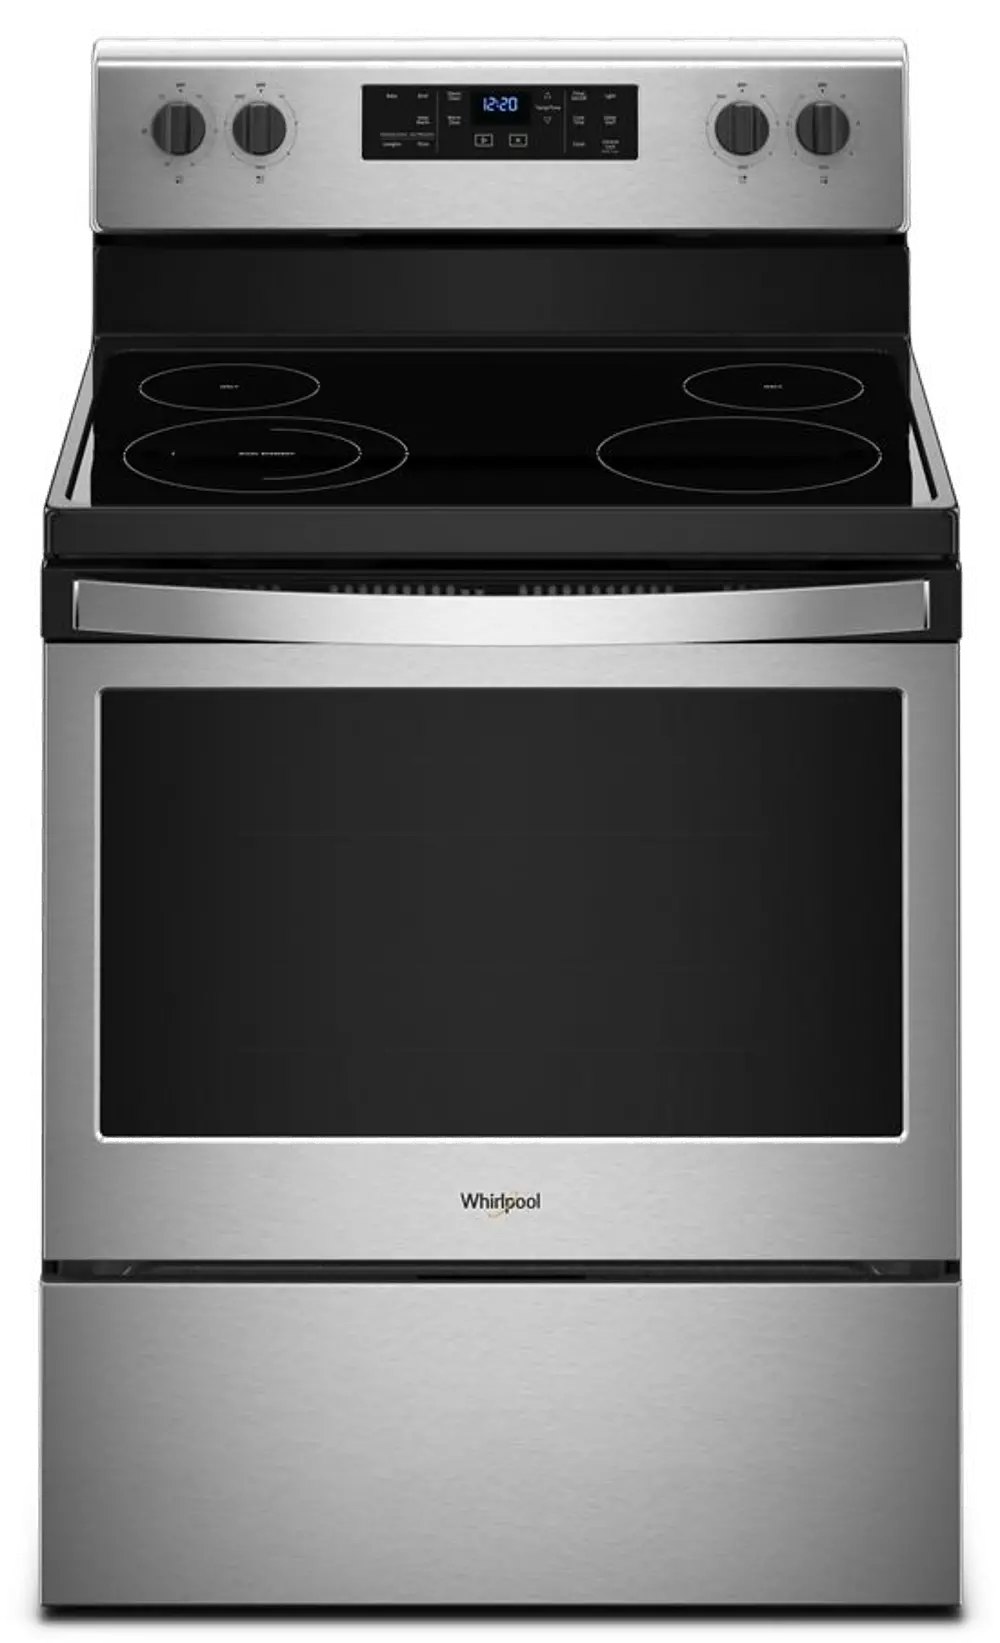 WFE505W0HS Whirlpool 5.3 cu. ft. Electric Range - Stainless Steel -1